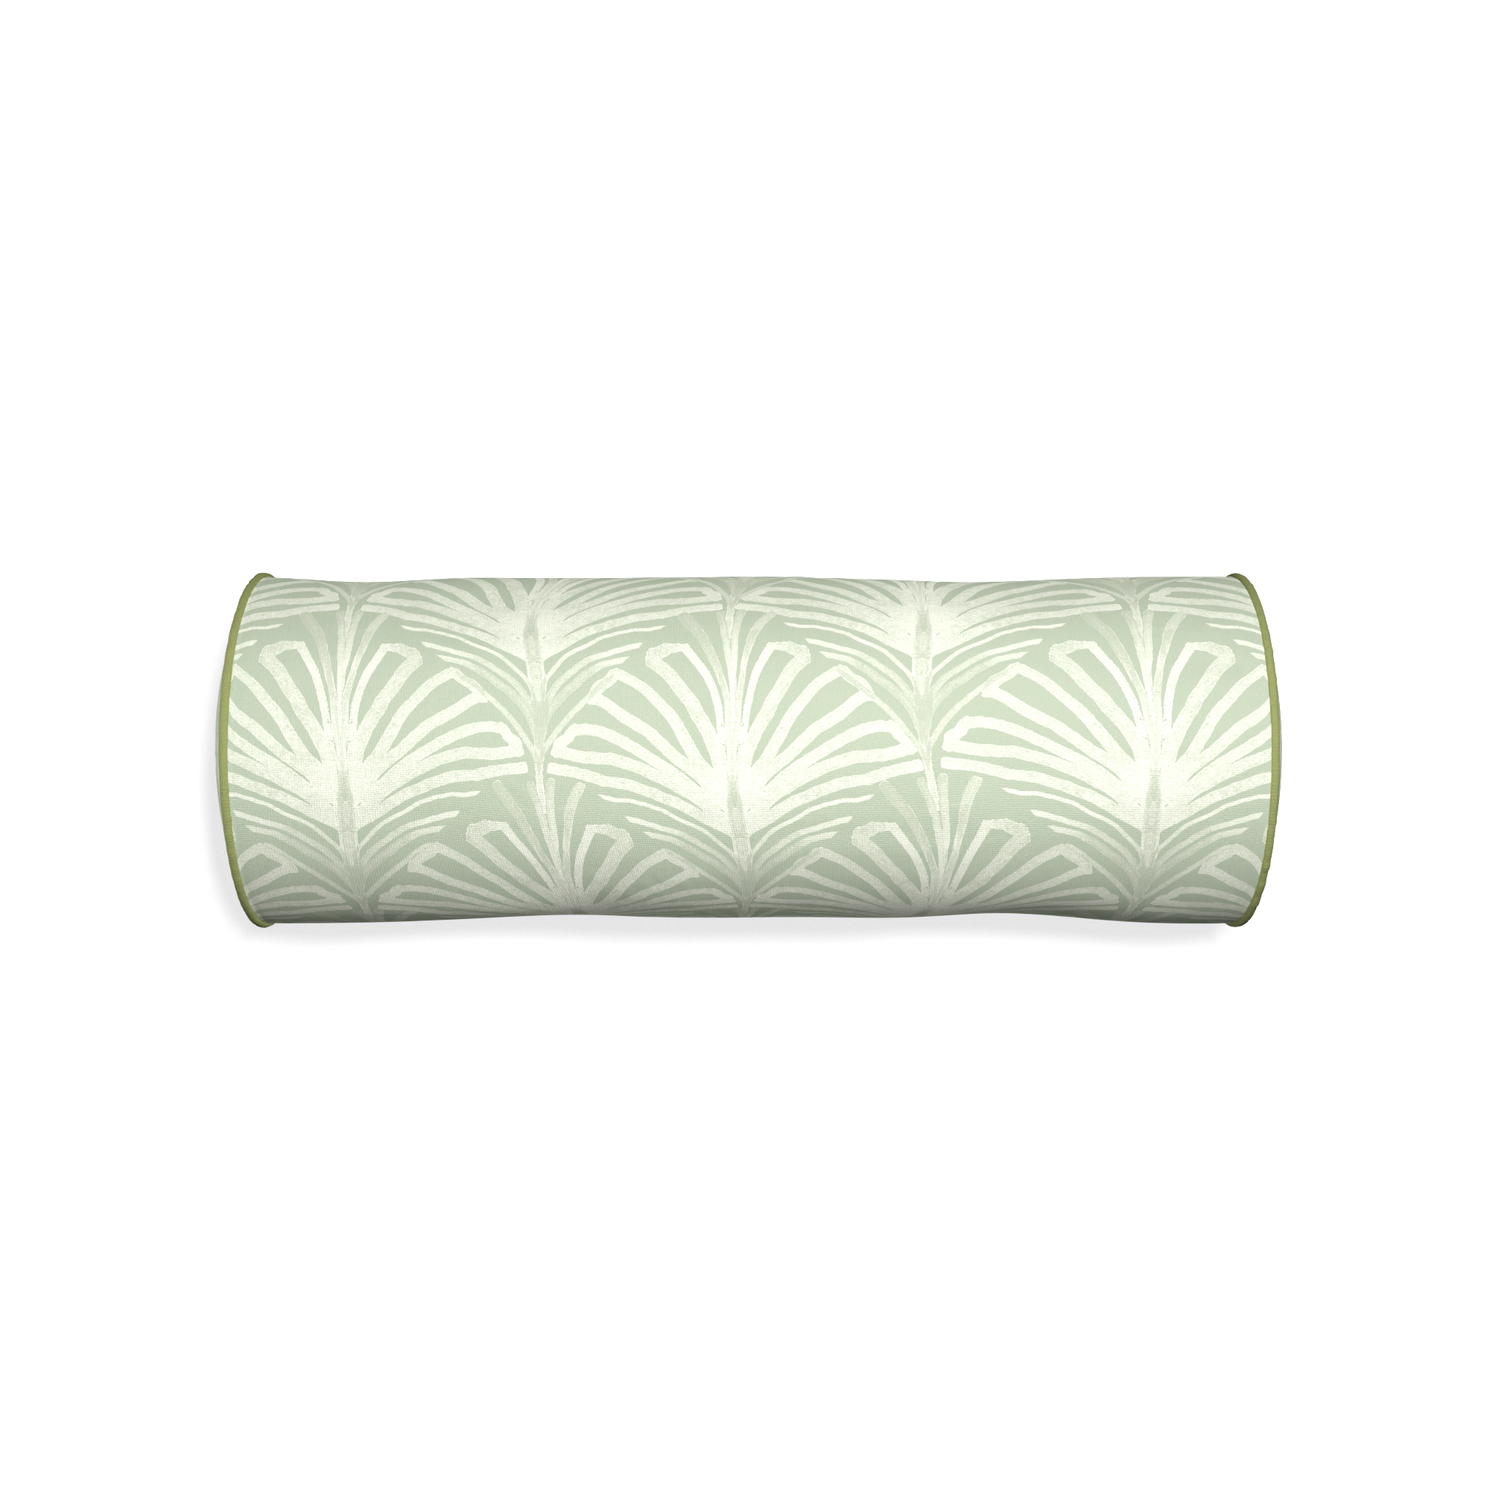 Bolster suzy sage custom sage green palmpillow with moss piping on white background